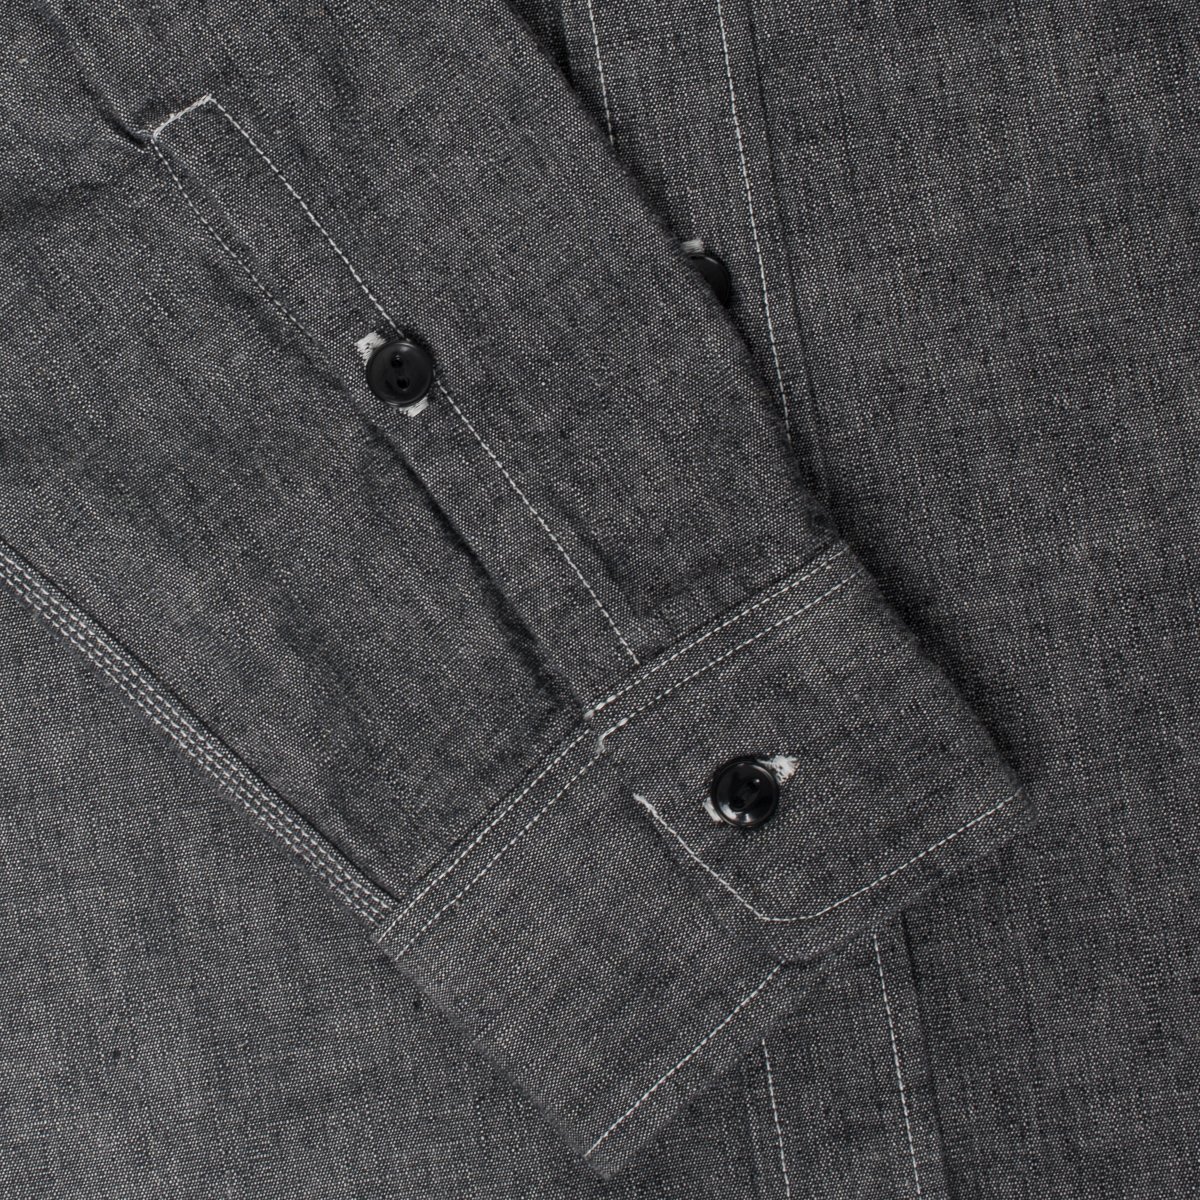 IHSH-21-BLK | Heavy Selvage Black Chambray Work Shirt